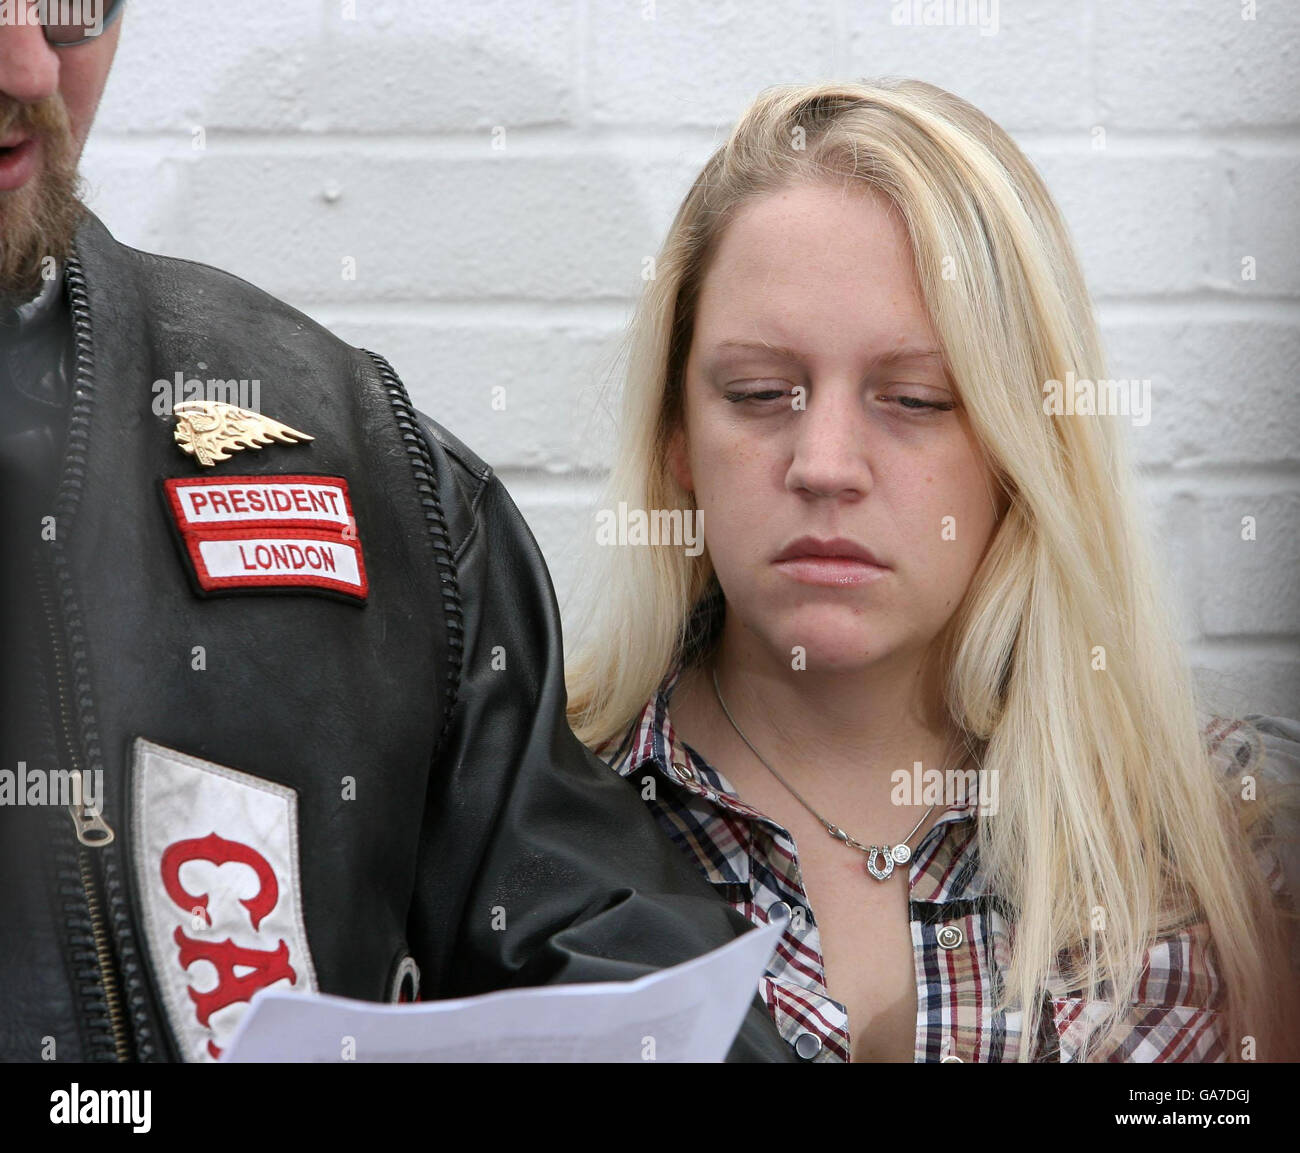 Rebecca Smith, 25, the girlfriend of murdered Hell's Angel Gerry Tobin, and the President of the London Hell's Angels Marcus Berriman face the media at Warr's Harley-Davidson Motorcycles in Mottingham, south-east London. Stock Photo